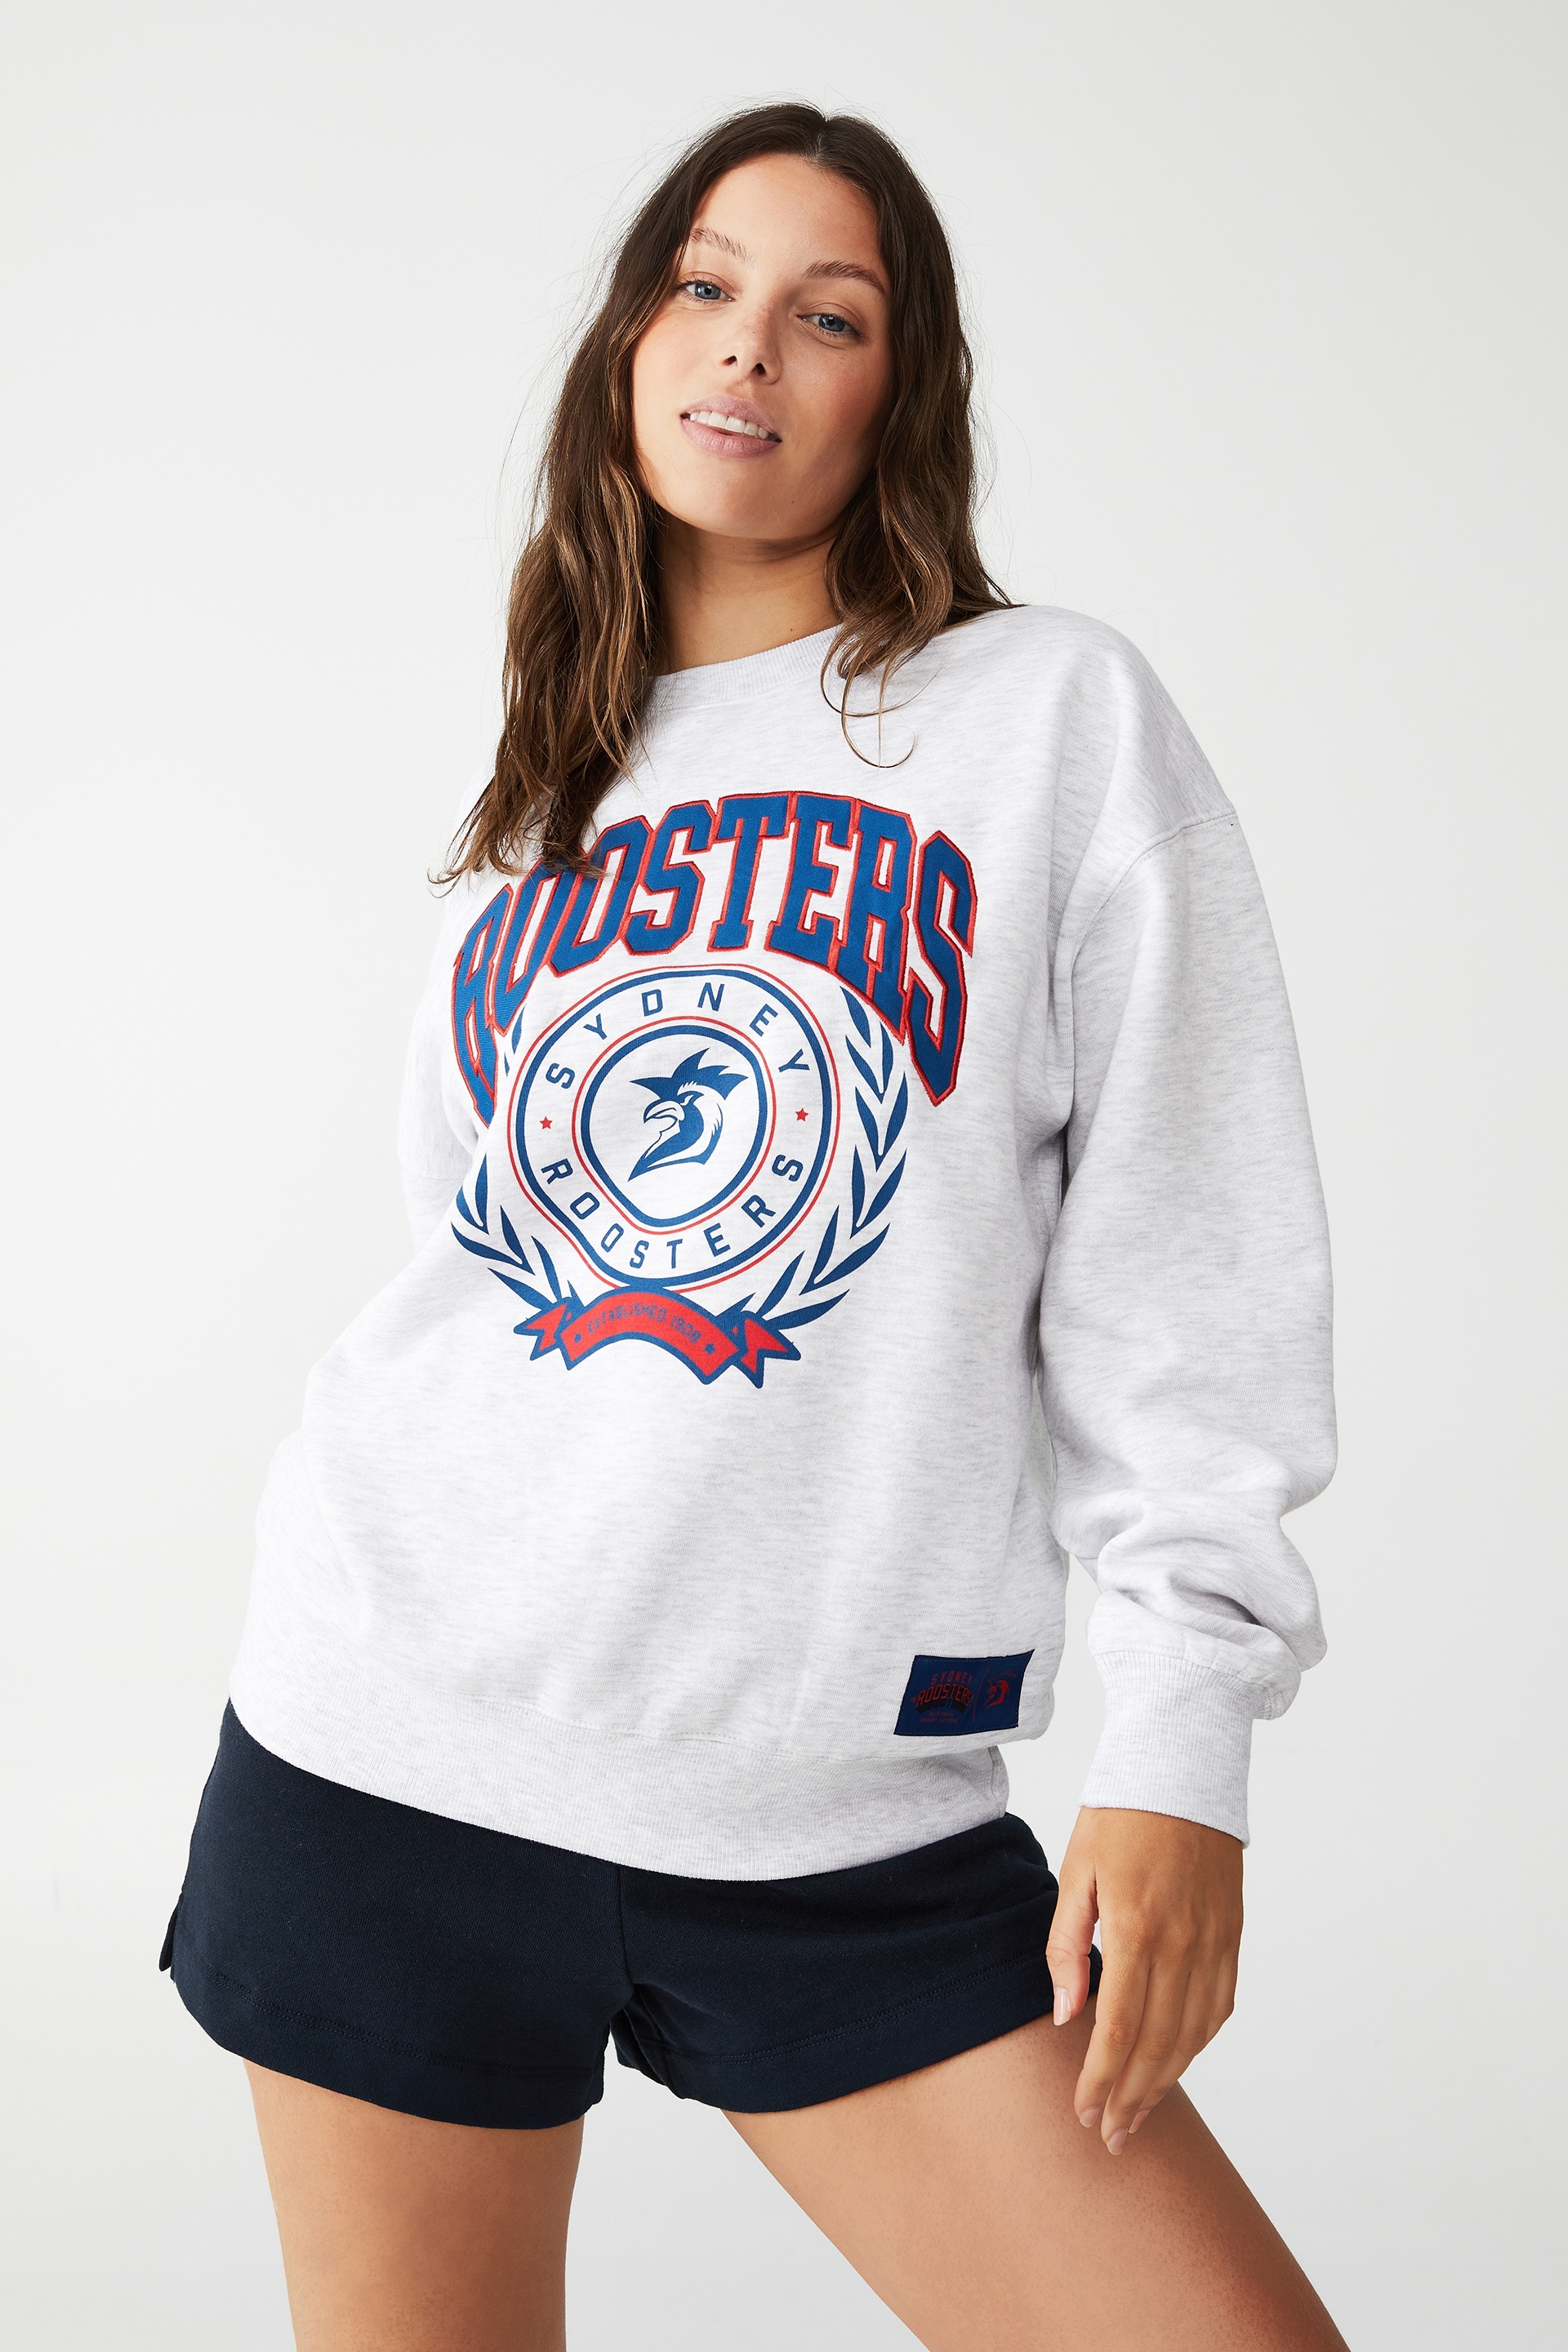 NRL - Nrl Womens Applique College Crew - Roosters